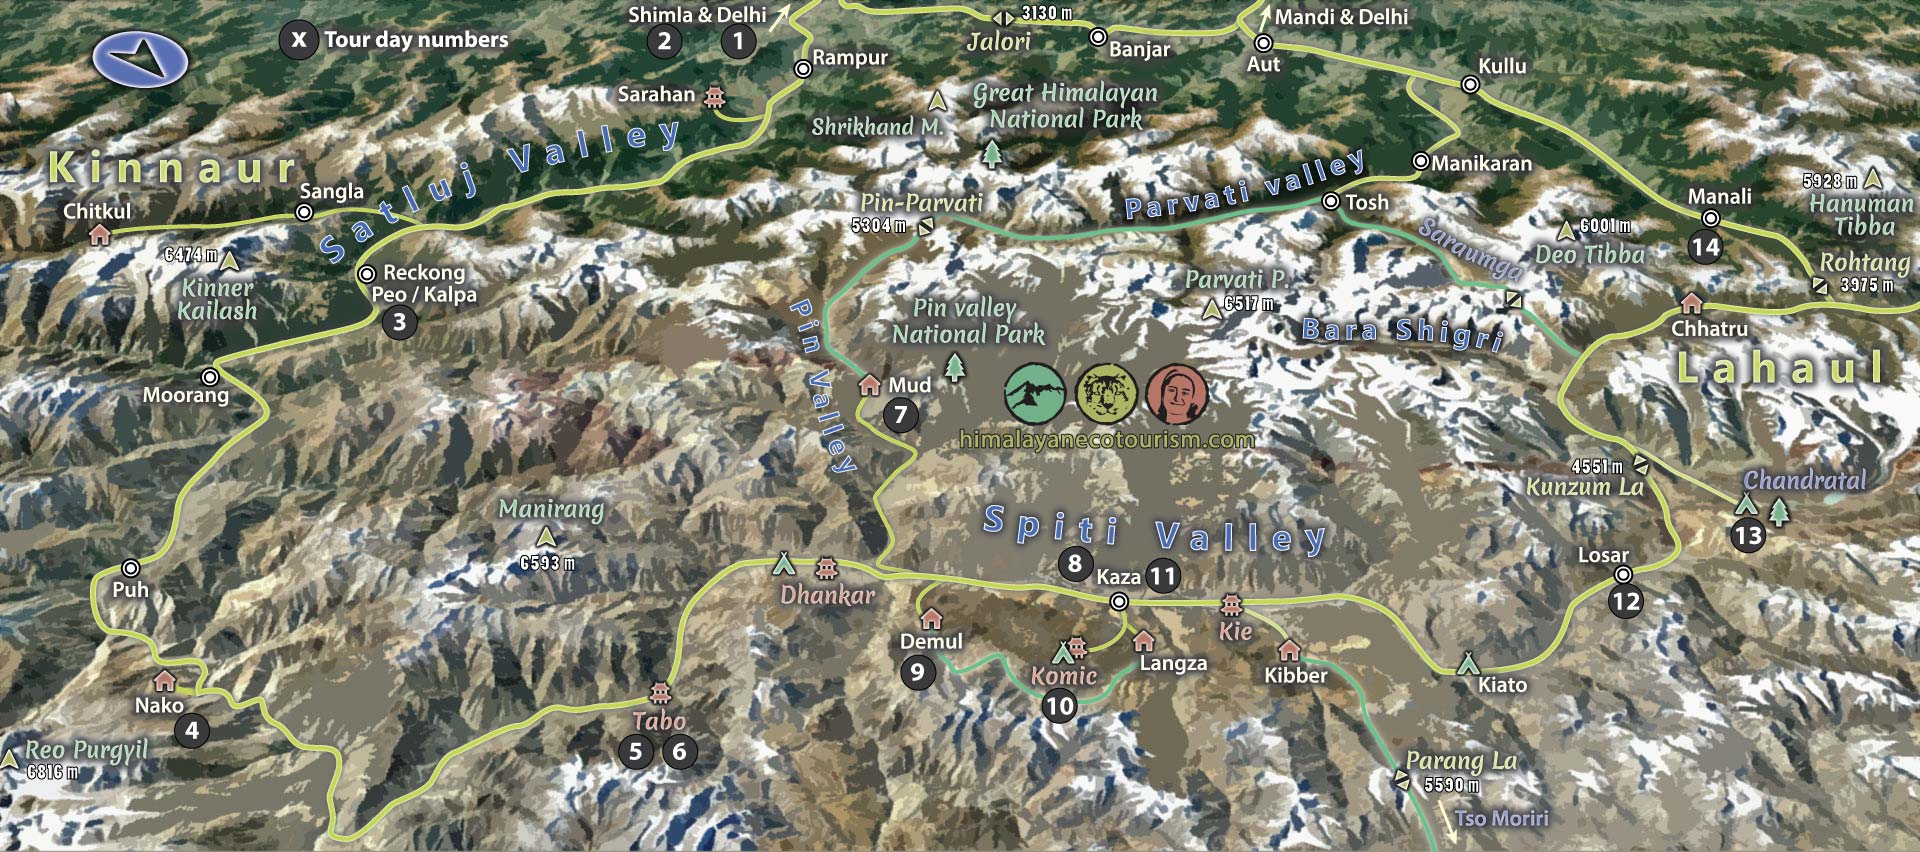 Spiti valley tour map.